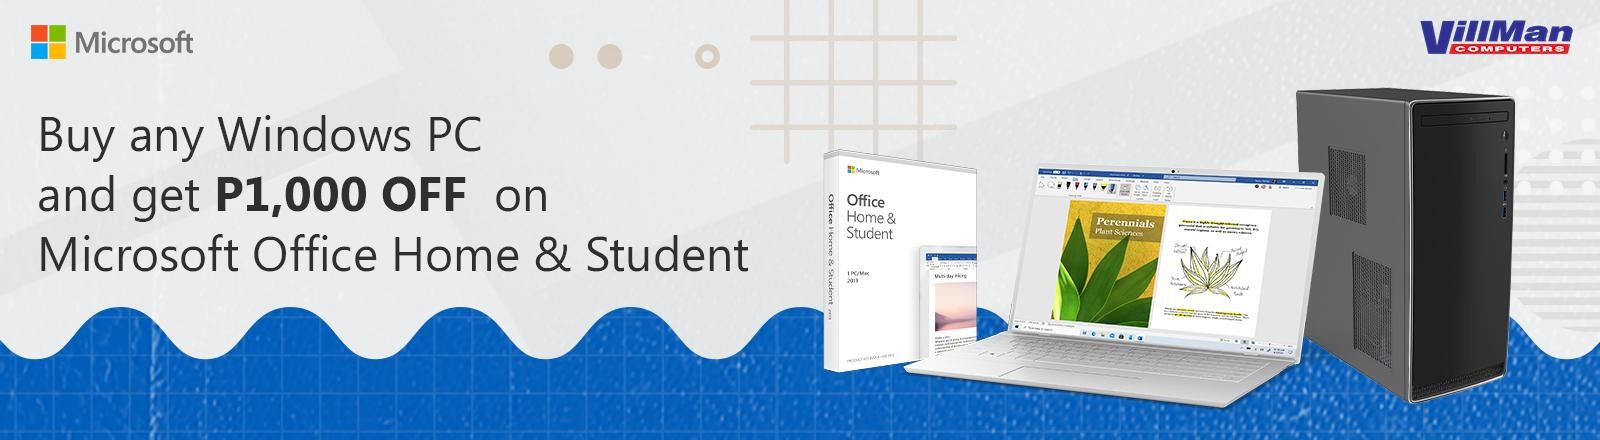 Microsoft Office Home & Student Promo